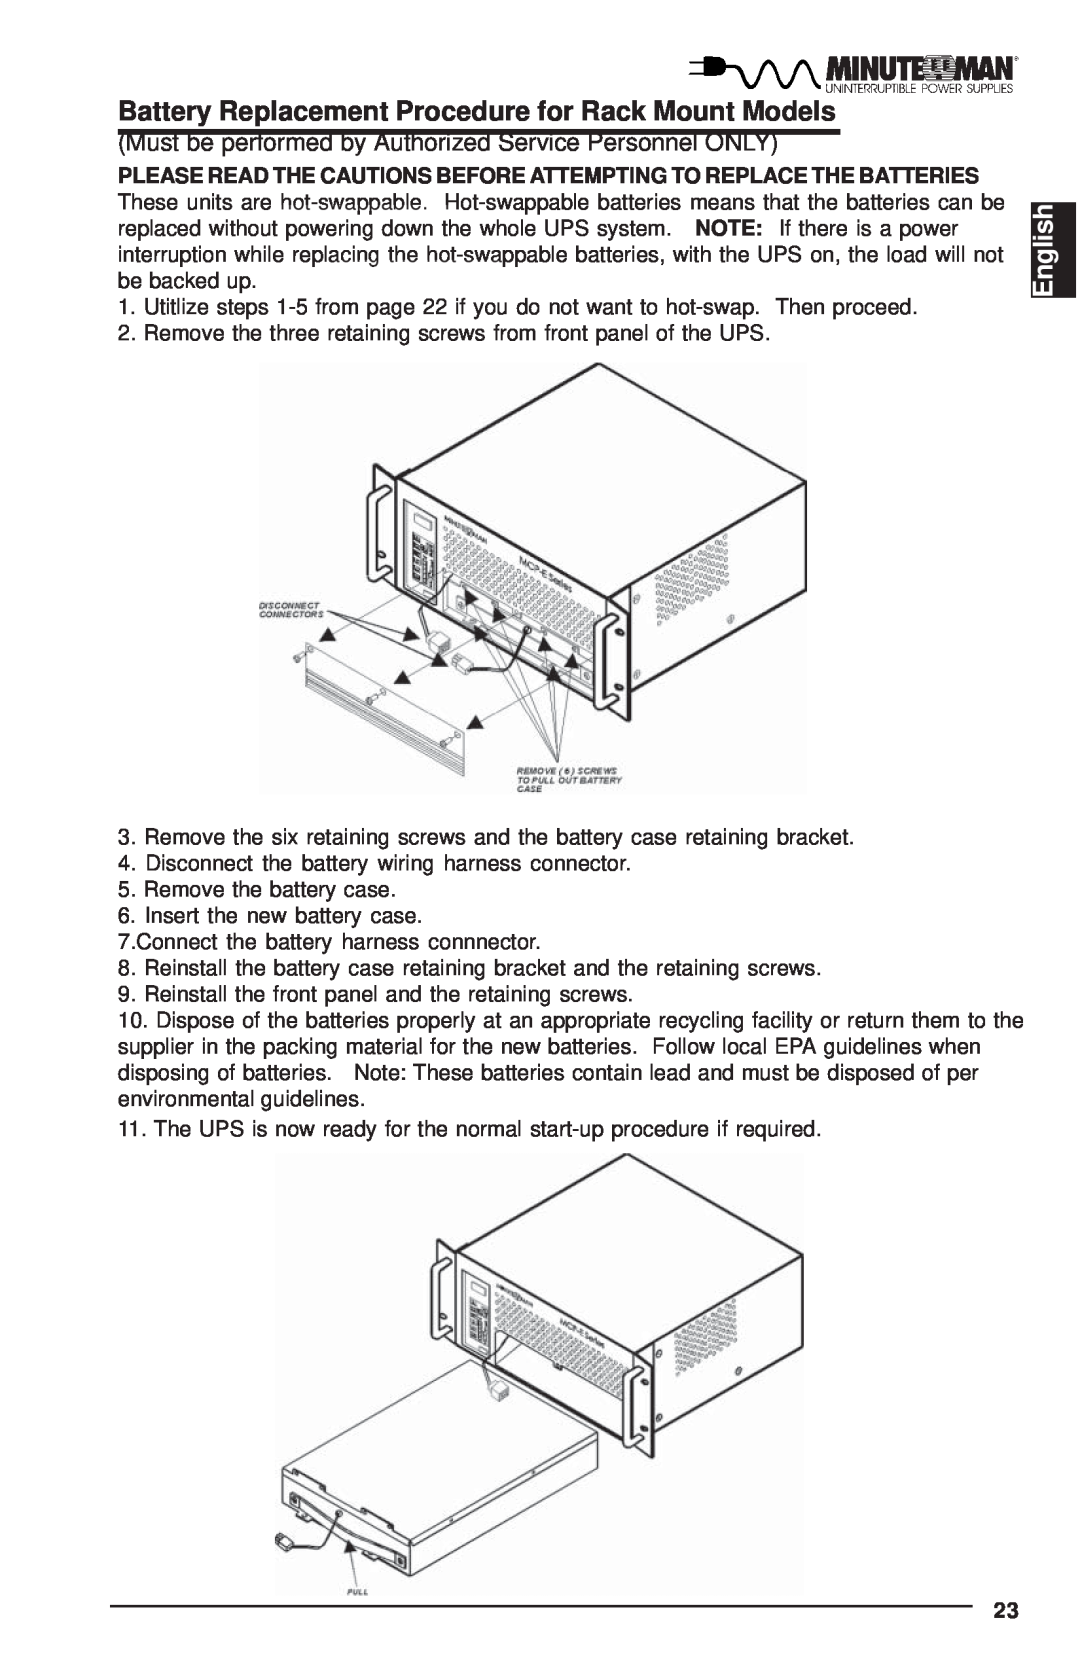 Minuteman UPS MCP-E user manual Battery Replacement Procedure for Rack Mount Models, English 